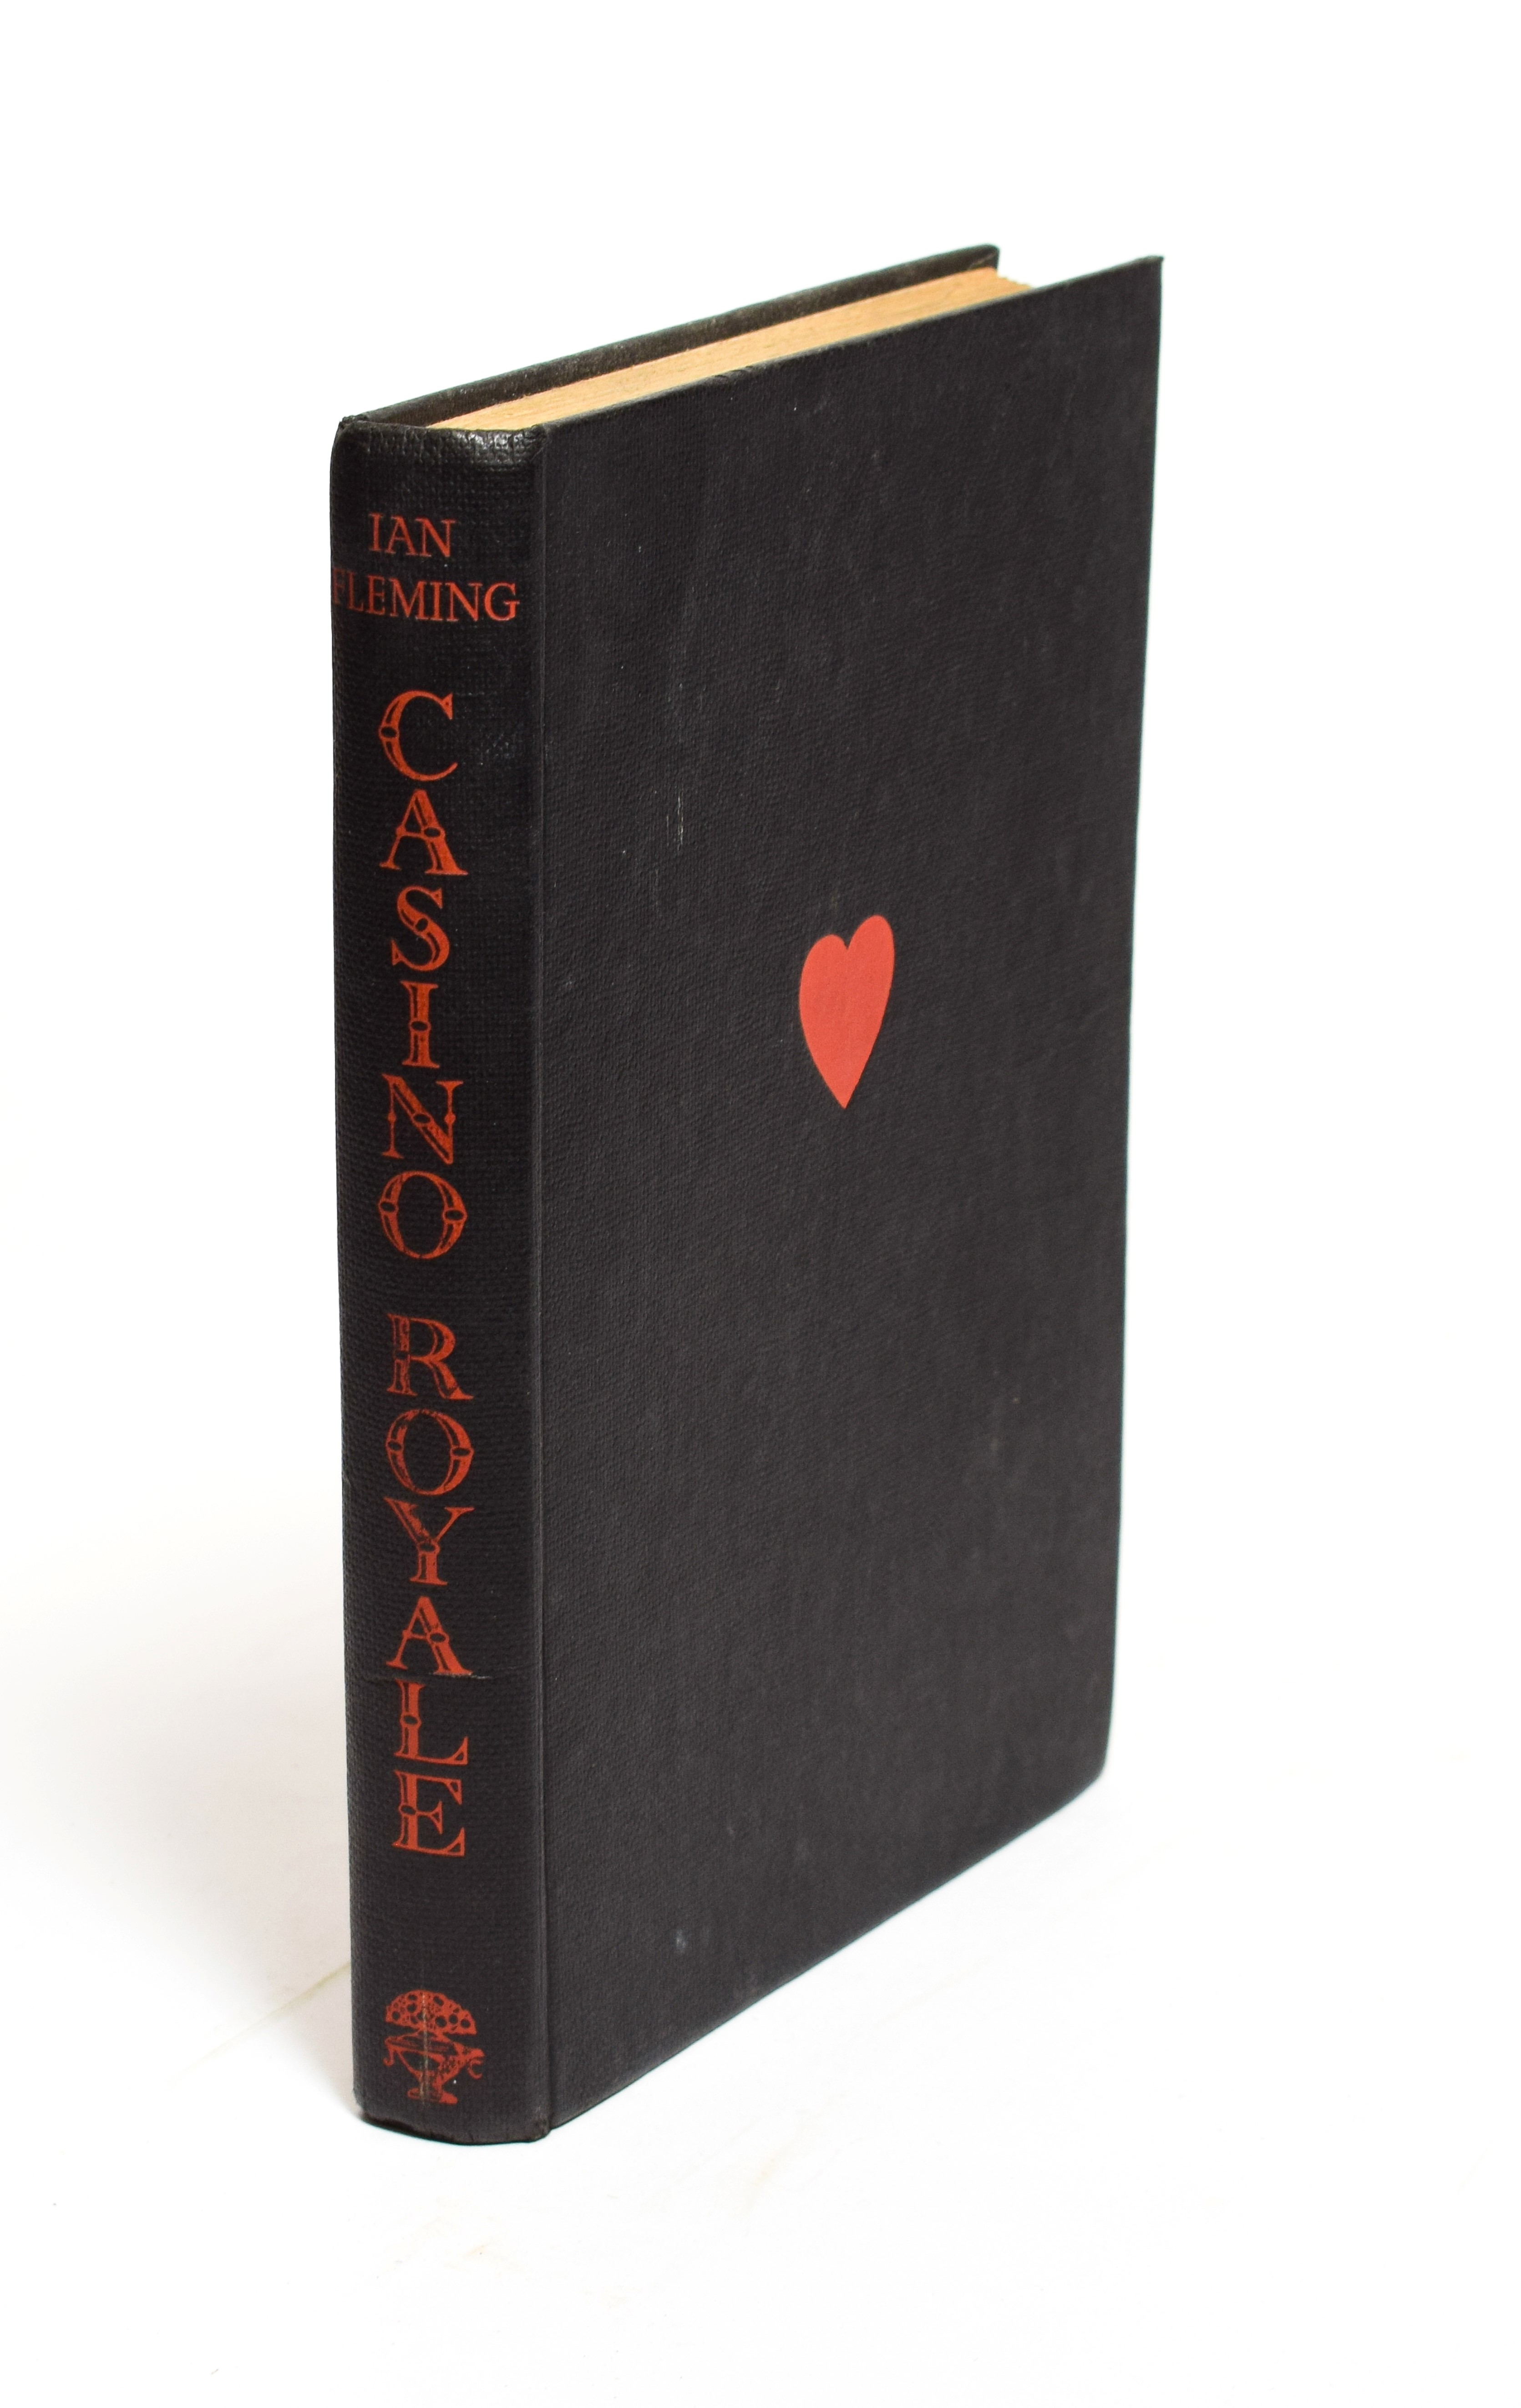 Fleming (Ian) Casino Royale, Cape, 1953, first edition, H.M.S Dolphin stamp and ink number to